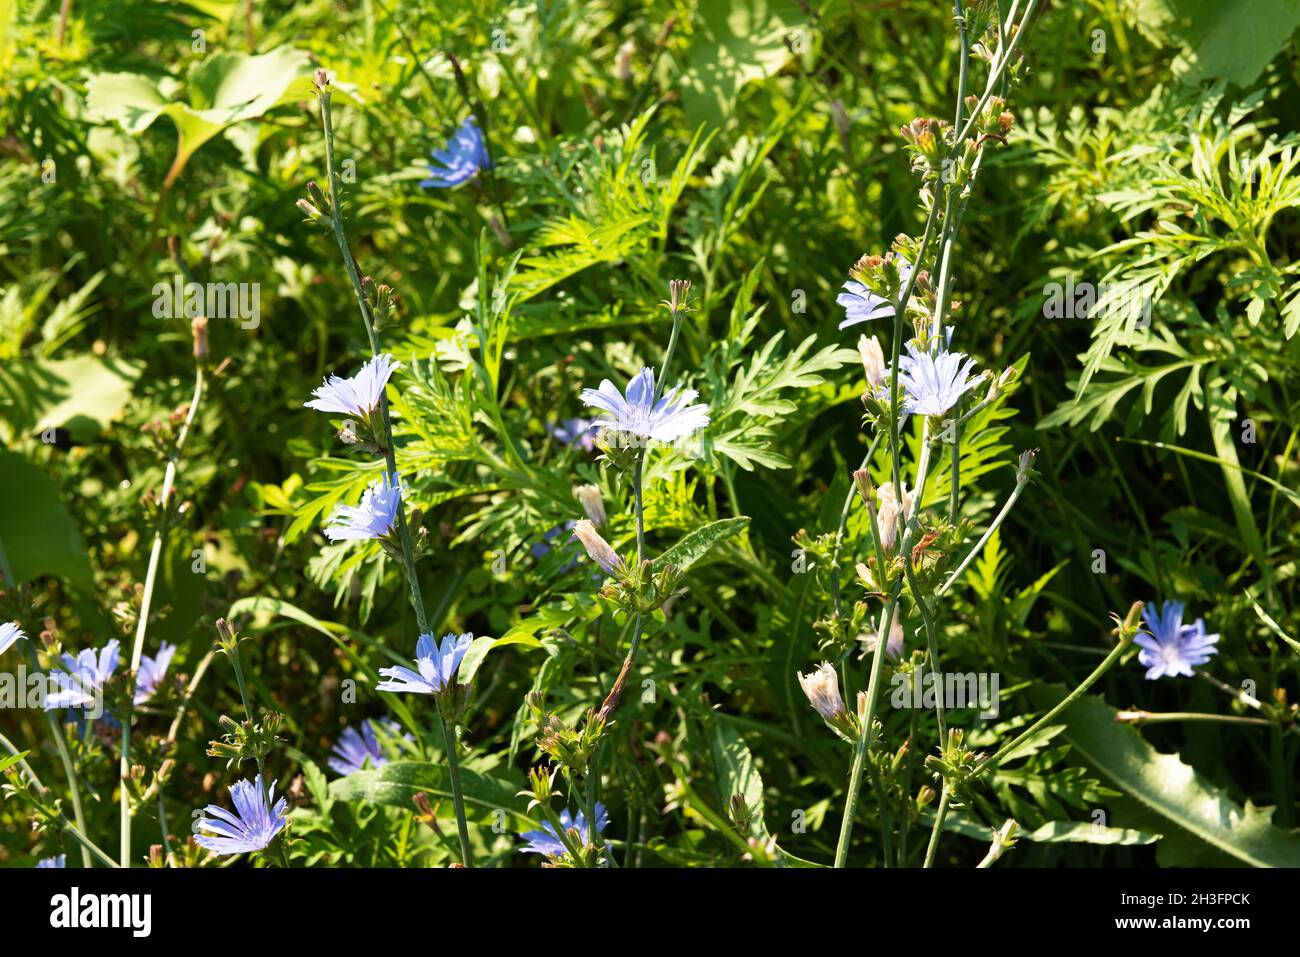 Large group of blooming stems of cichorium plants with blue flowers in natural habitat. This wildflower is used for alternative coffee drink. Summer s Stock Photo